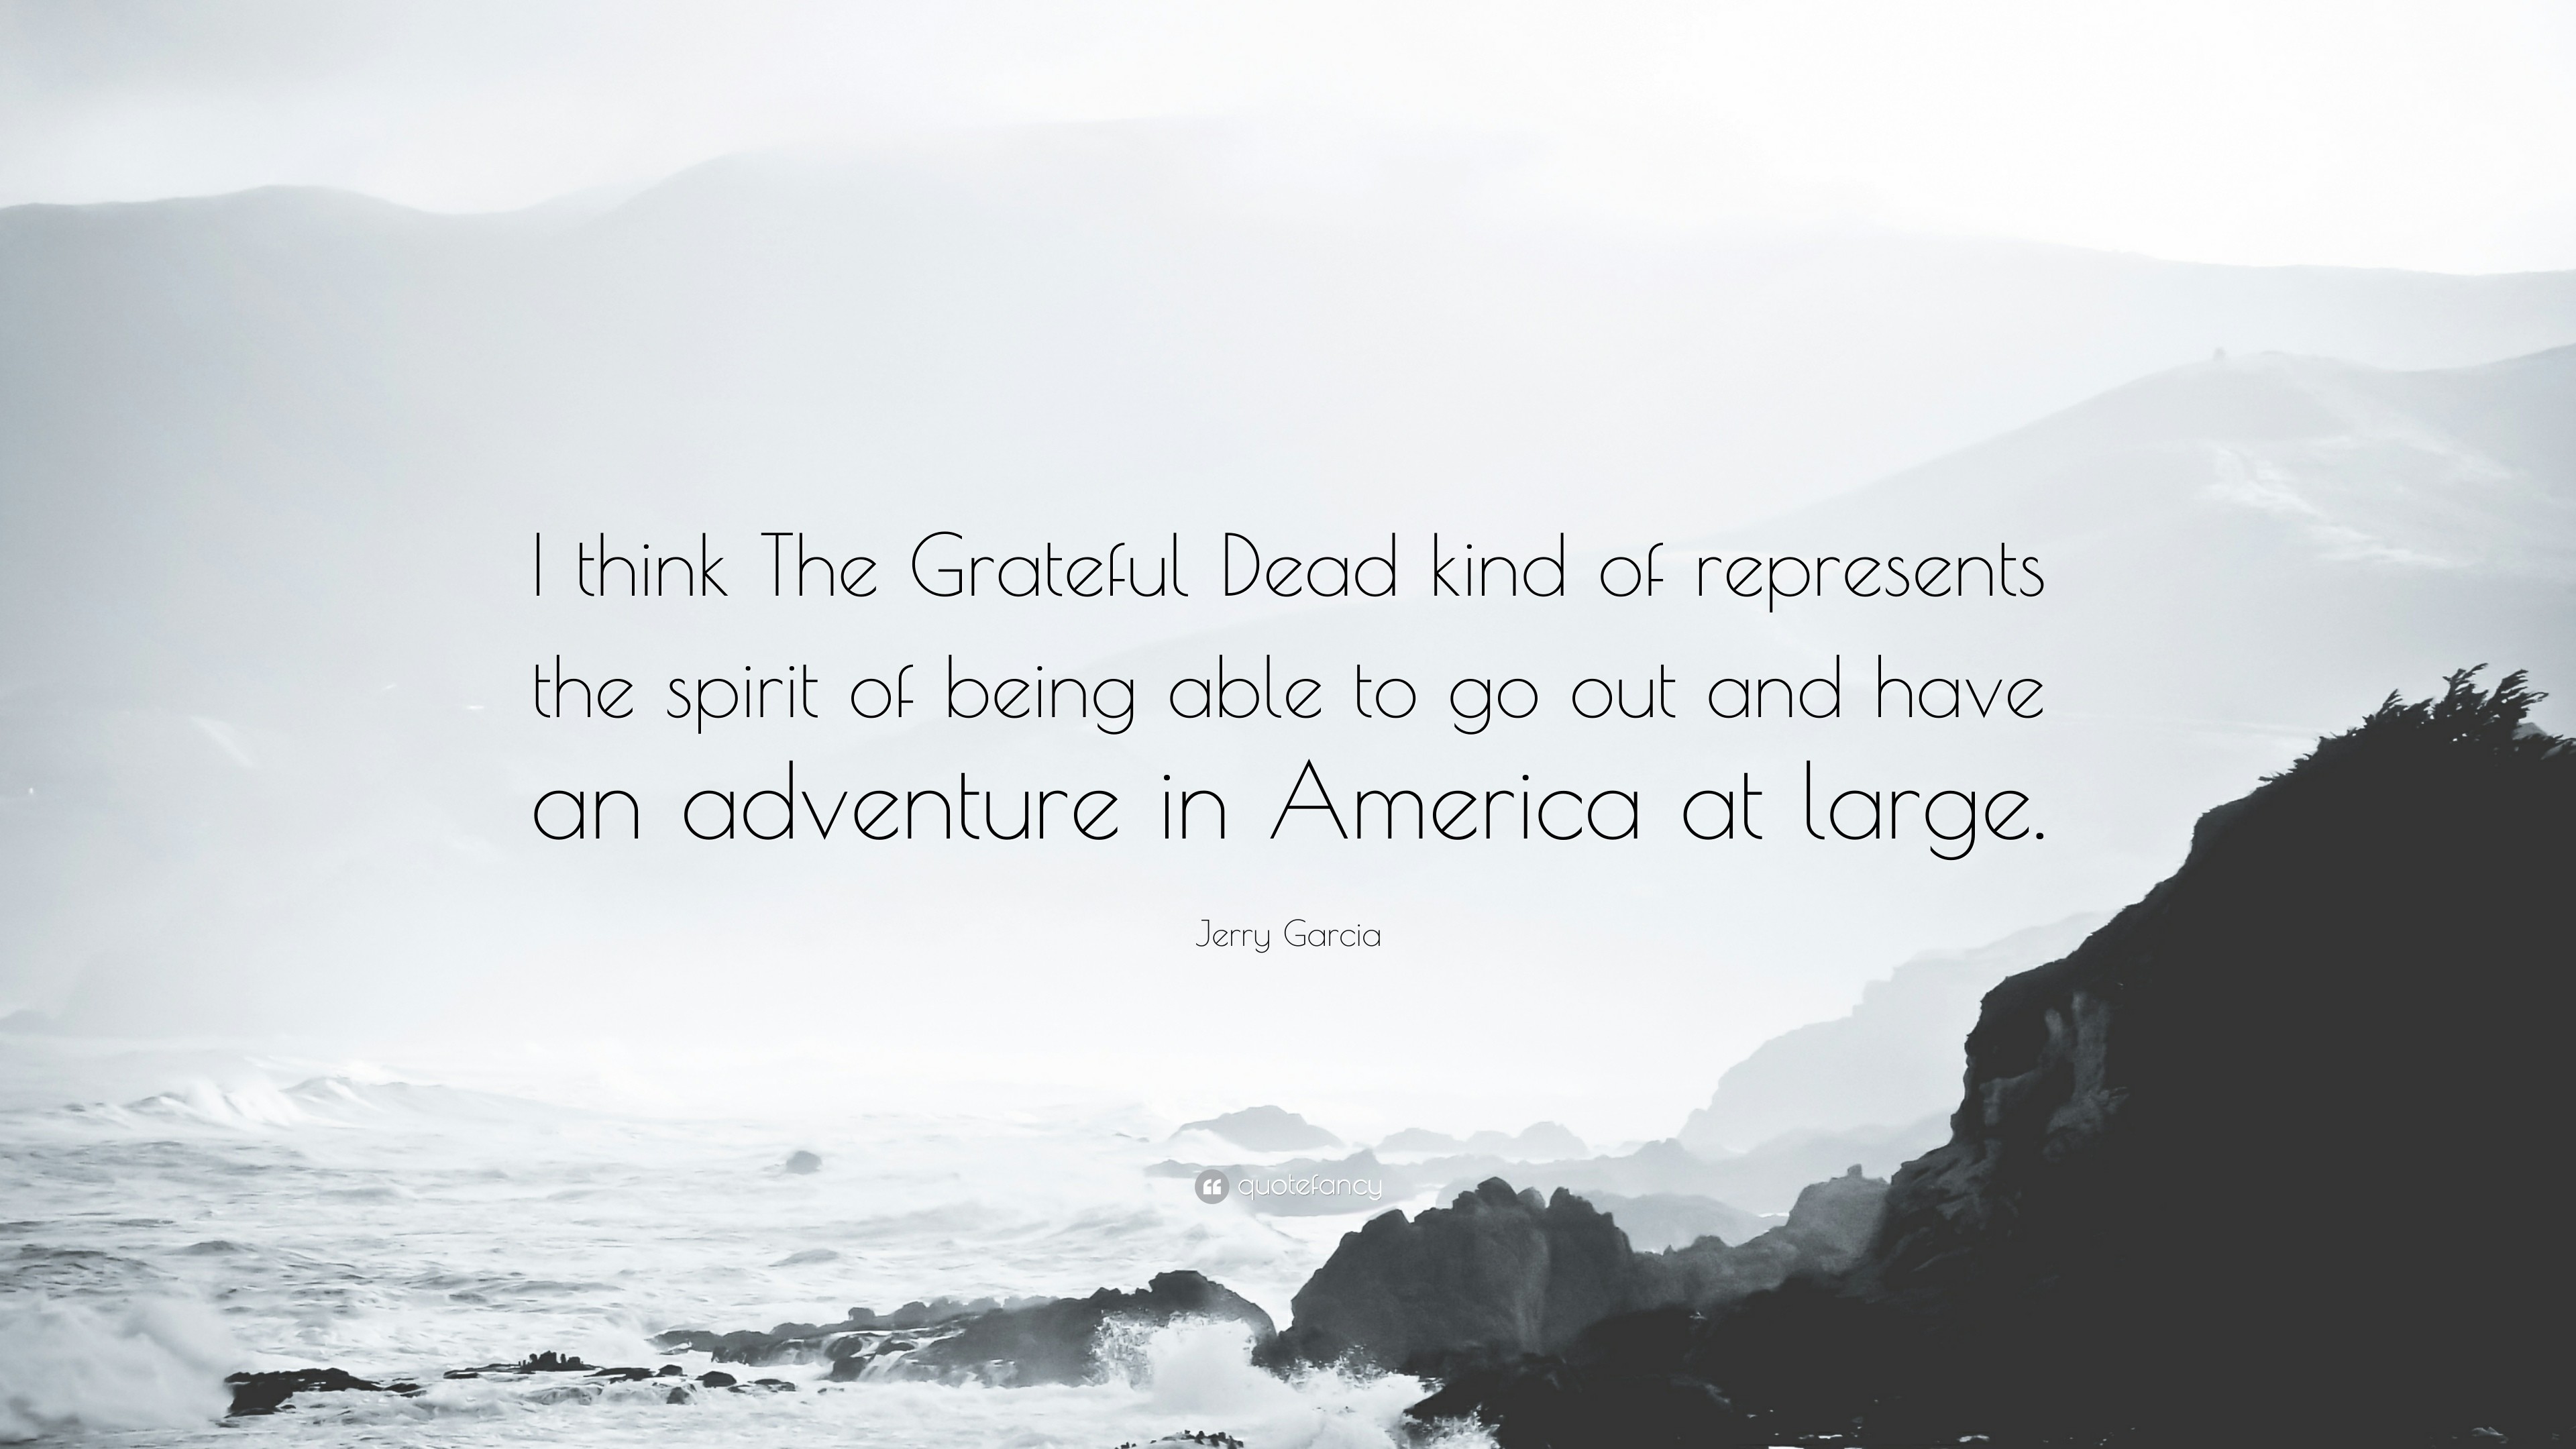 3840x2160 Jerry Garcia Quote: “I think The Grateful Dead kind of represents the  spirit of